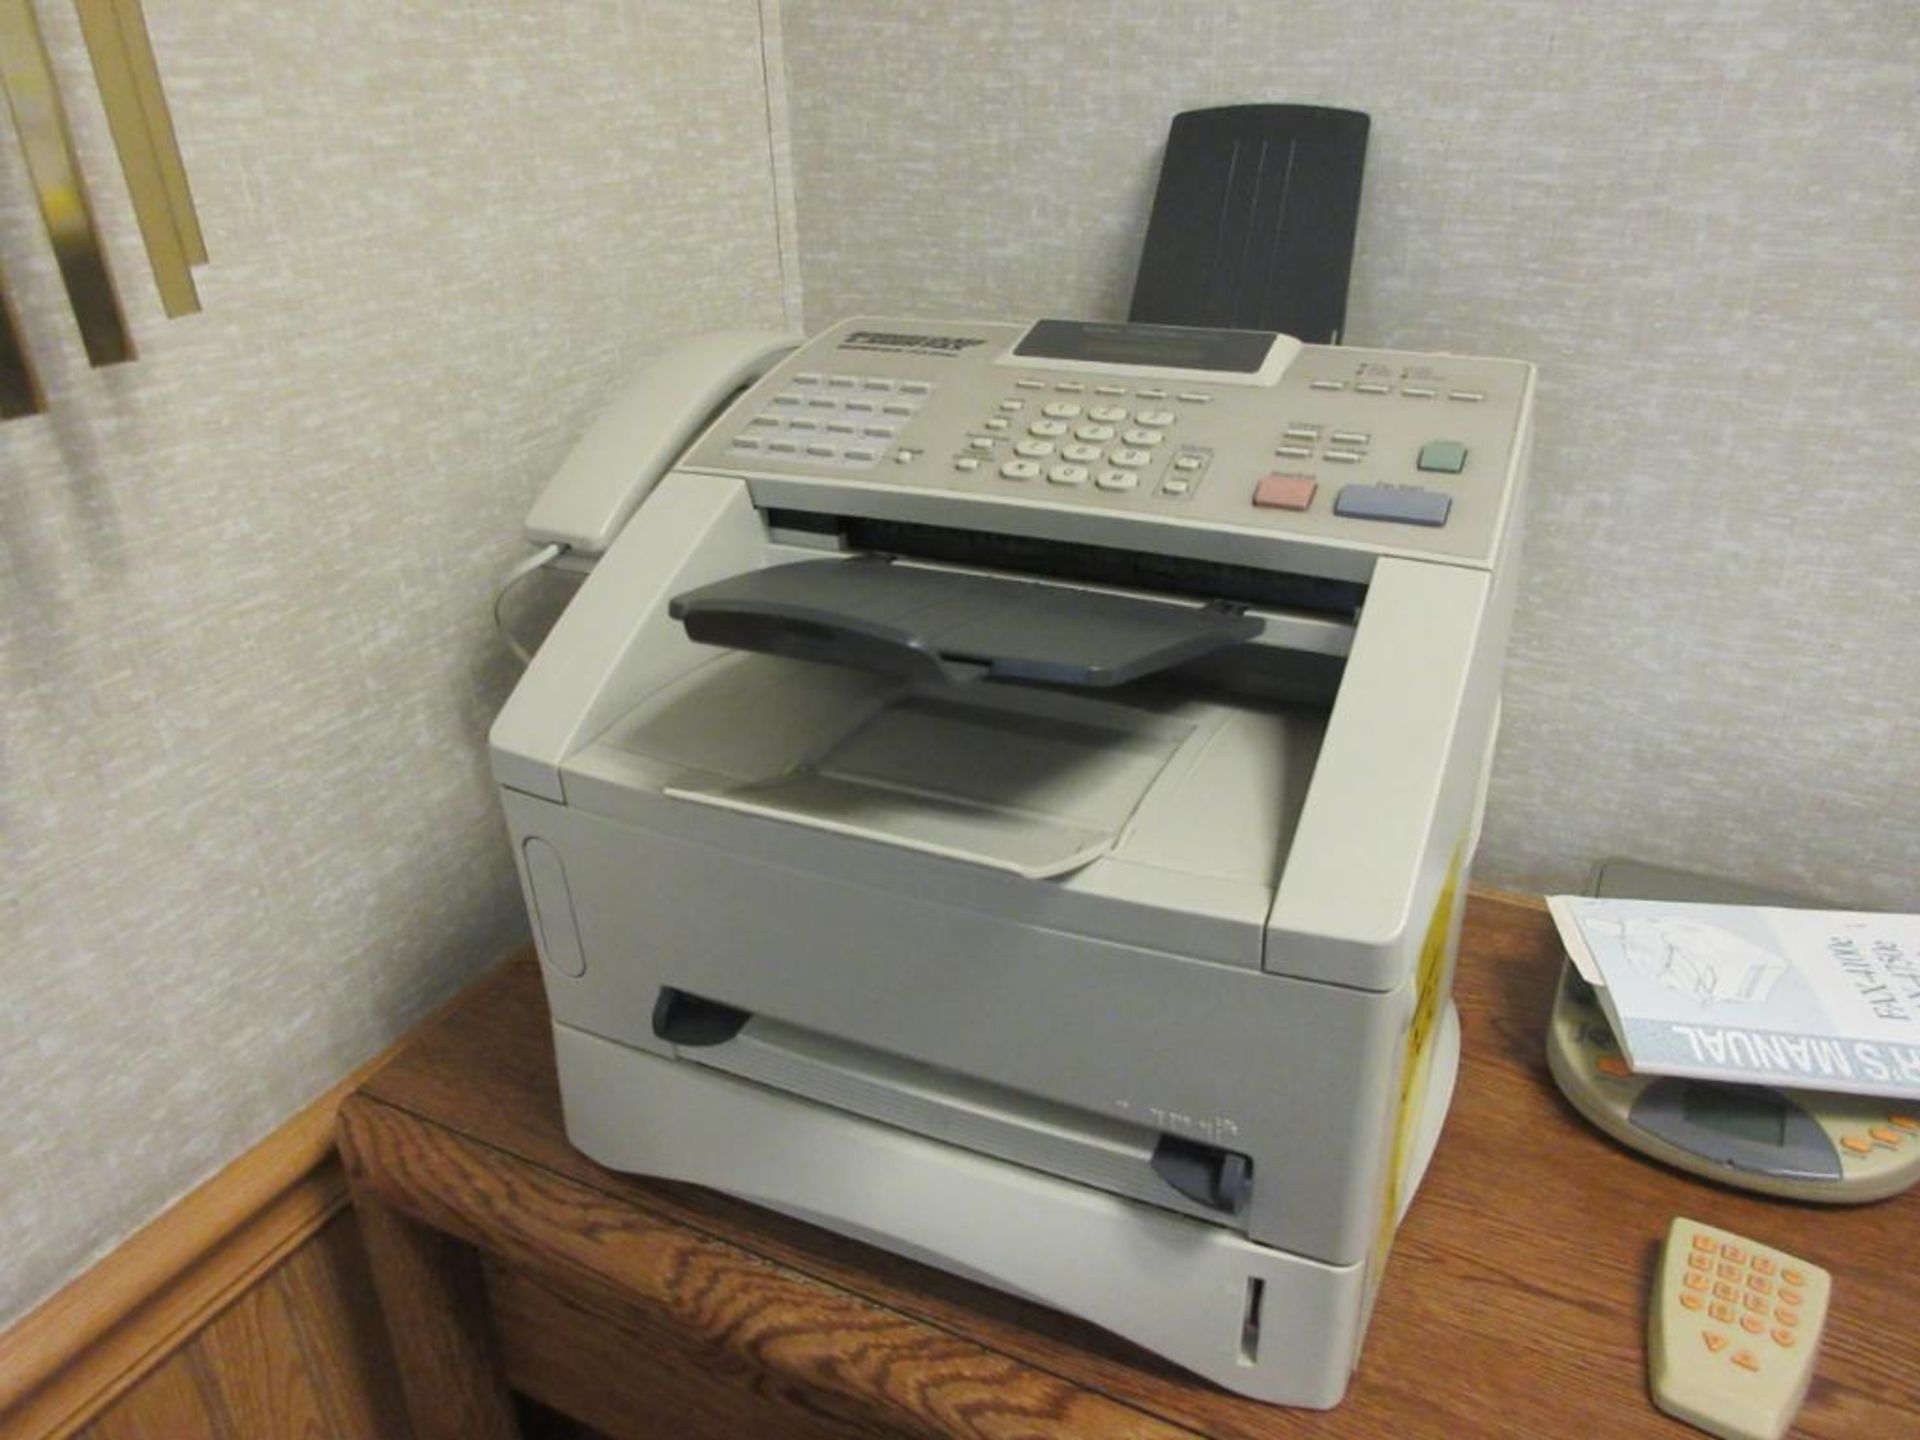 ELECTRONICS IN OFFICE: OKI PRINTER, BROTHER ELECTRONIC TYPEWRITER (X3), BUSINESS CLASS LASER FAX, - Image 6 of 8